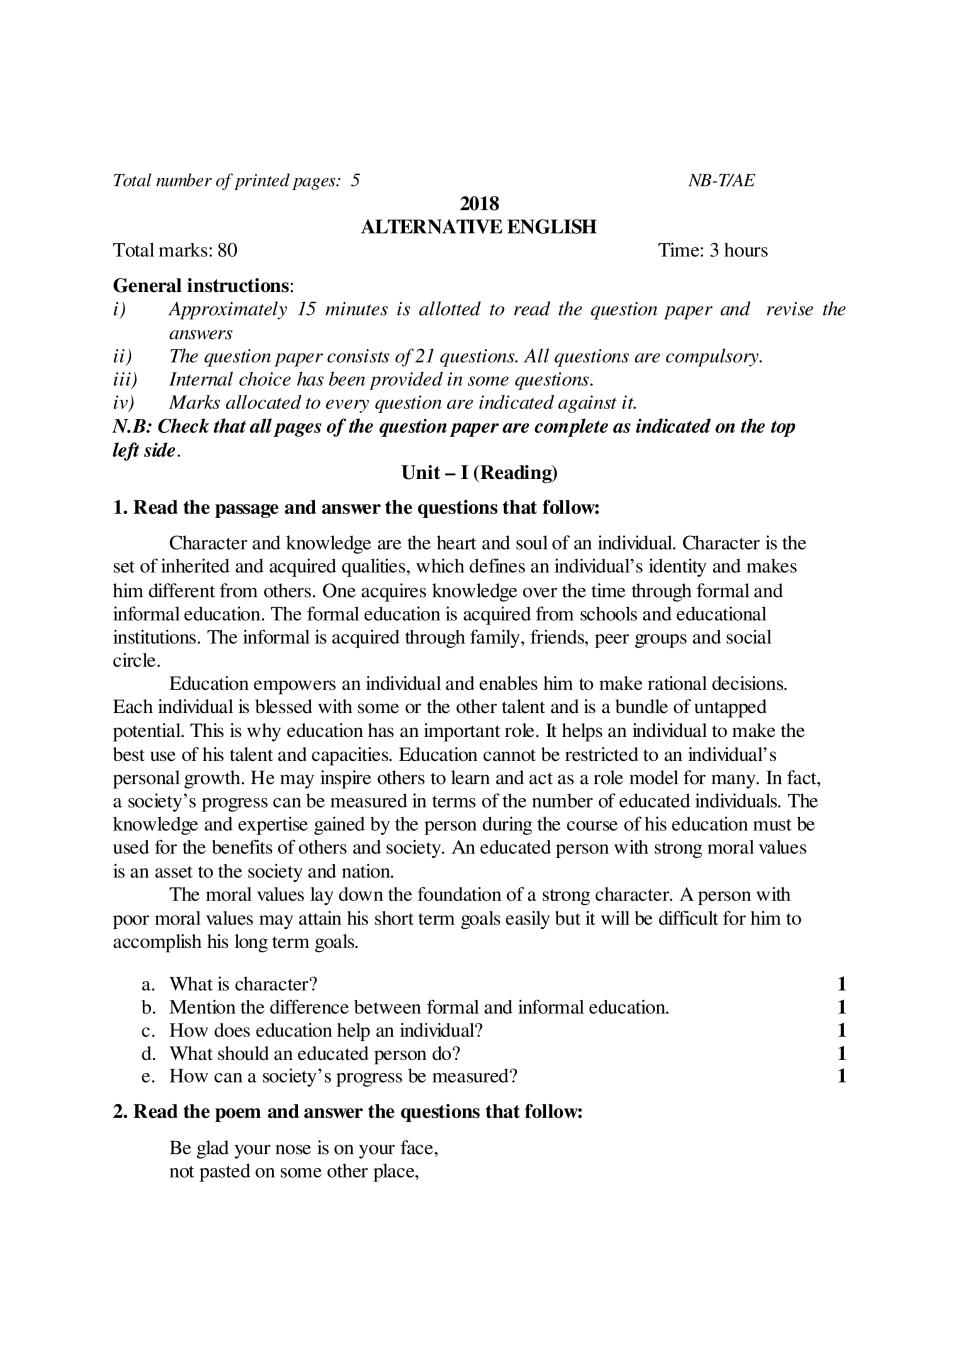 NBSE Class 10 Question Paper 2018 for Alternative English - Page 1